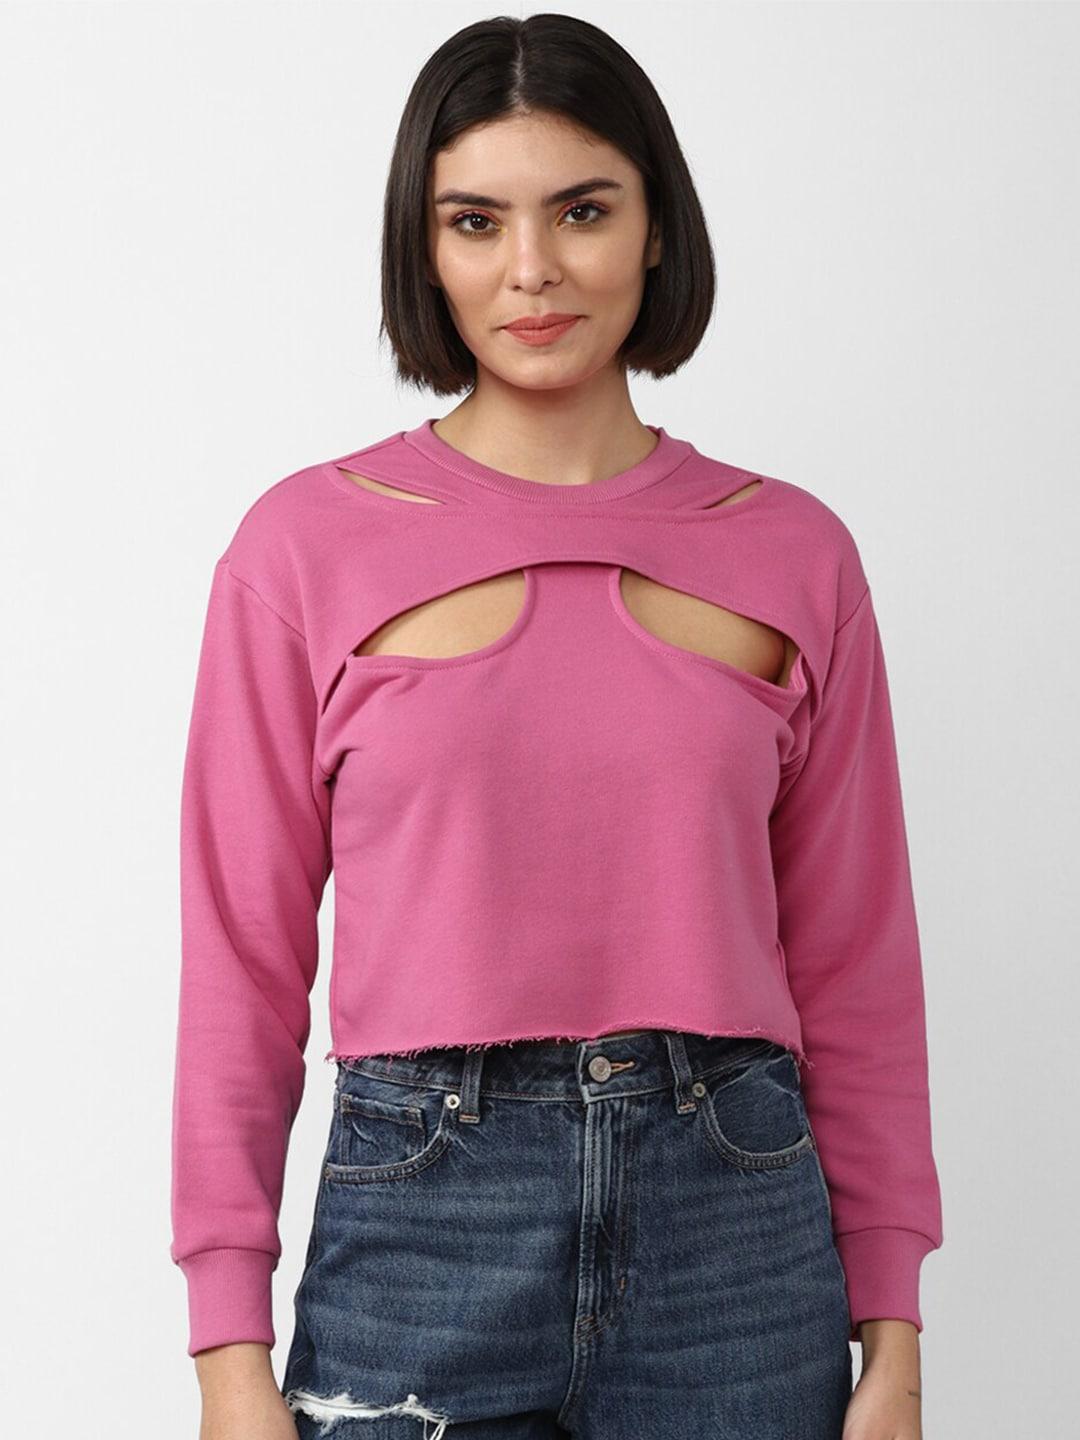 forever-21-women-solid-round-neck-long-sleeves-top